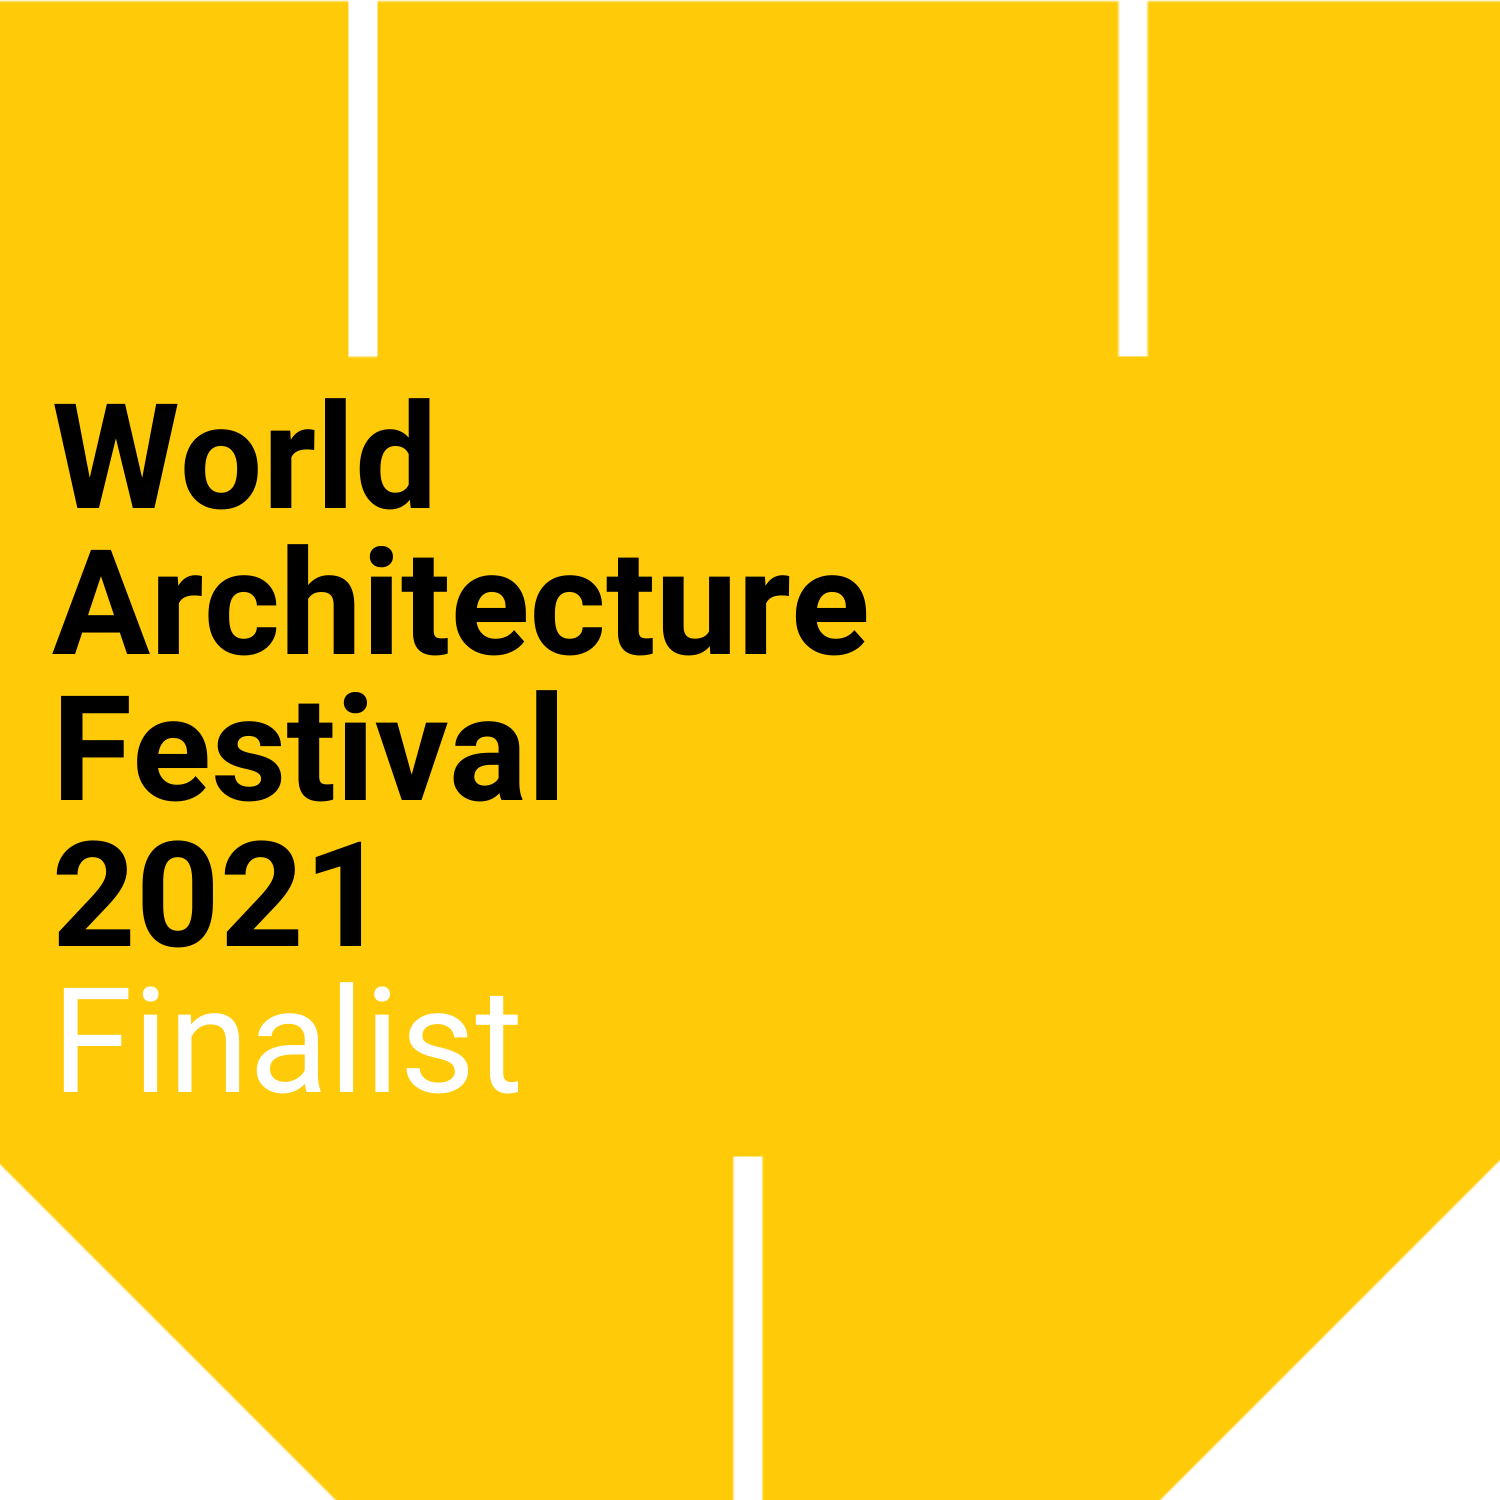 WTA's Back to back recognition at the World Architecture Festival 2021